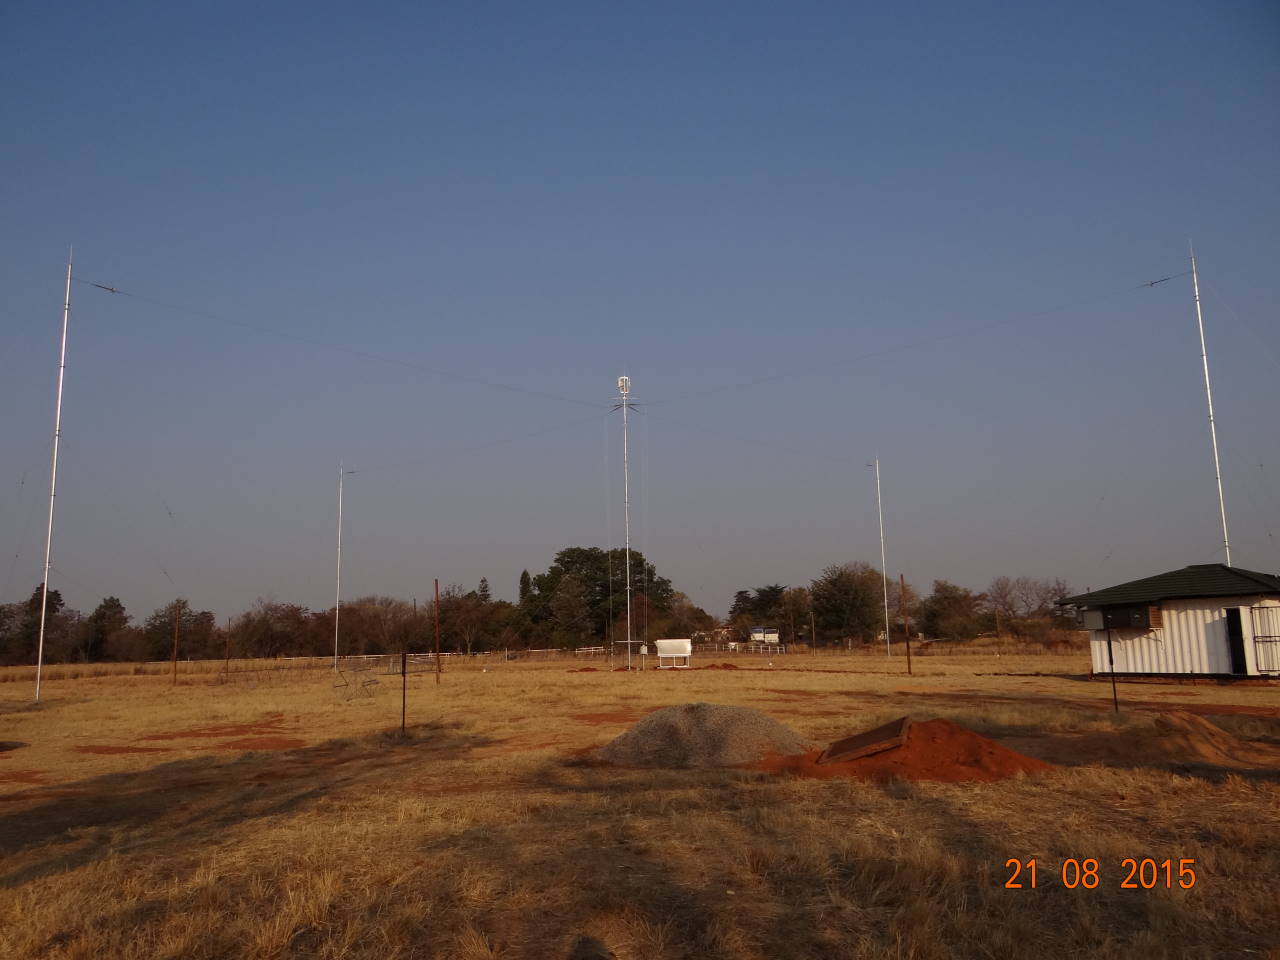 Highest-power, 25 kW Kinstar antenna installed for Radio Pulpit in South Africa, for DRM 30 tests